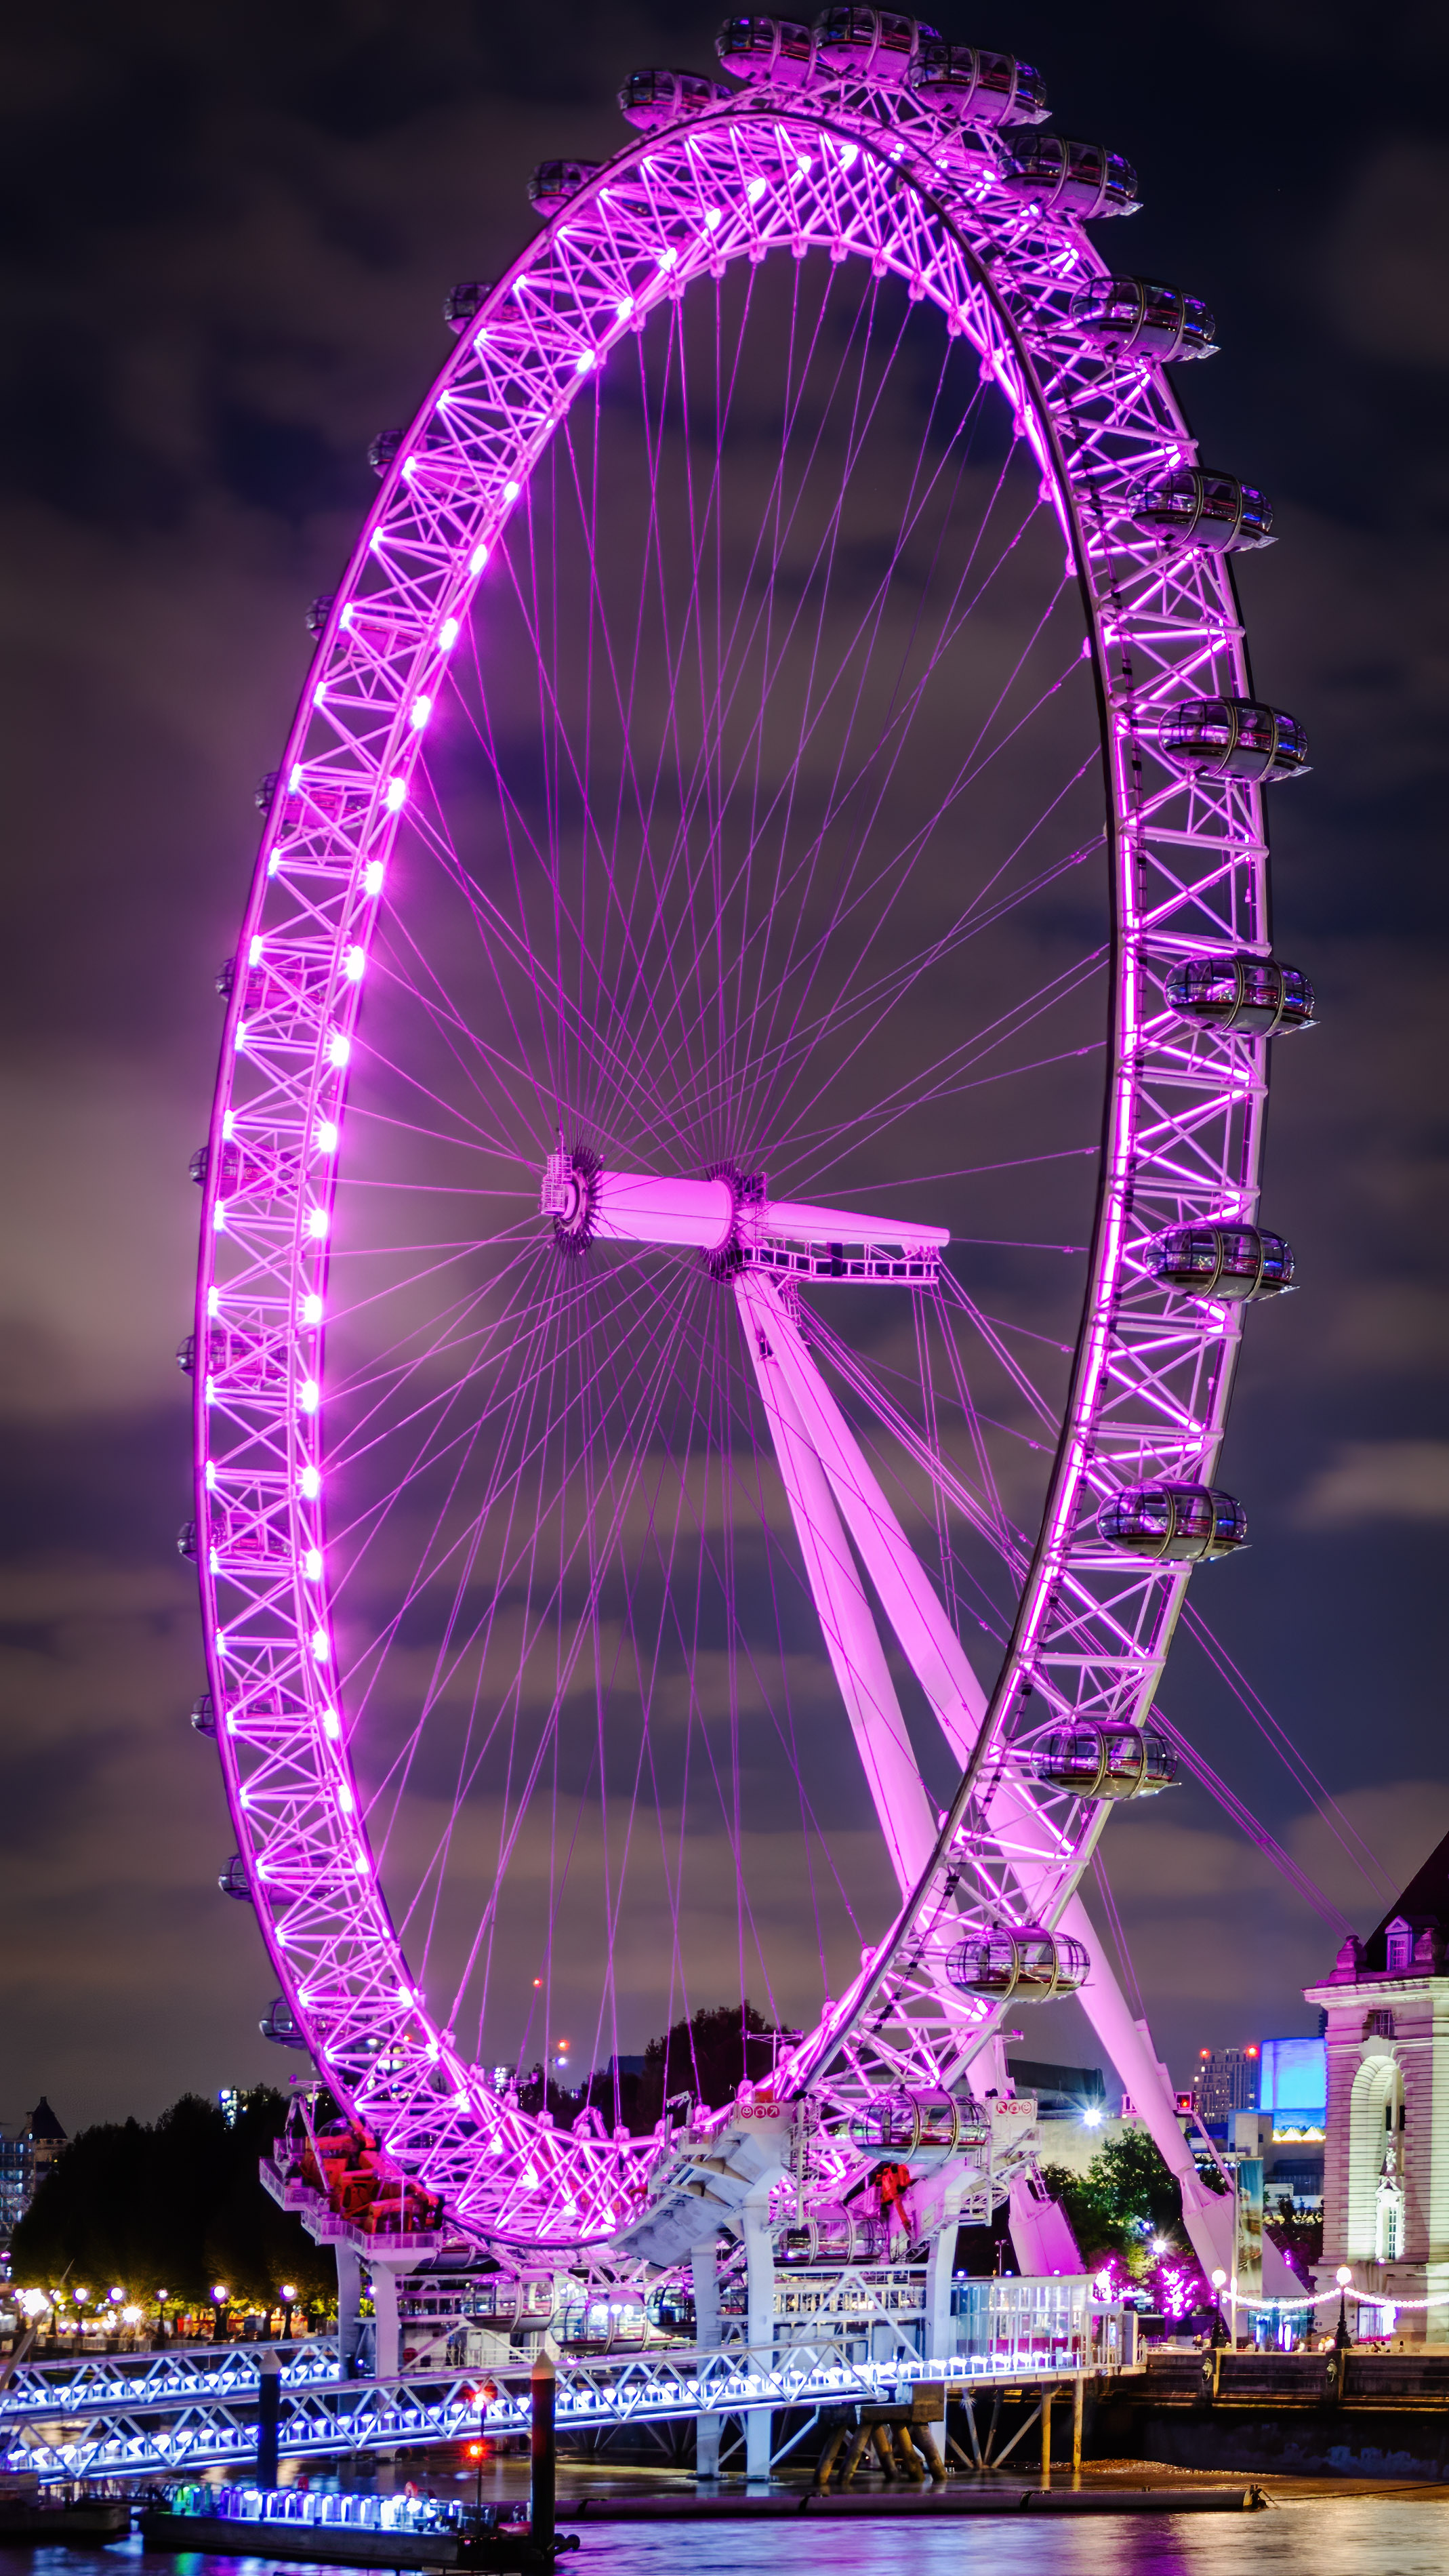 This wallpaper captures the beauty of London Eye at night with its glowing buildings and stunning skyline.